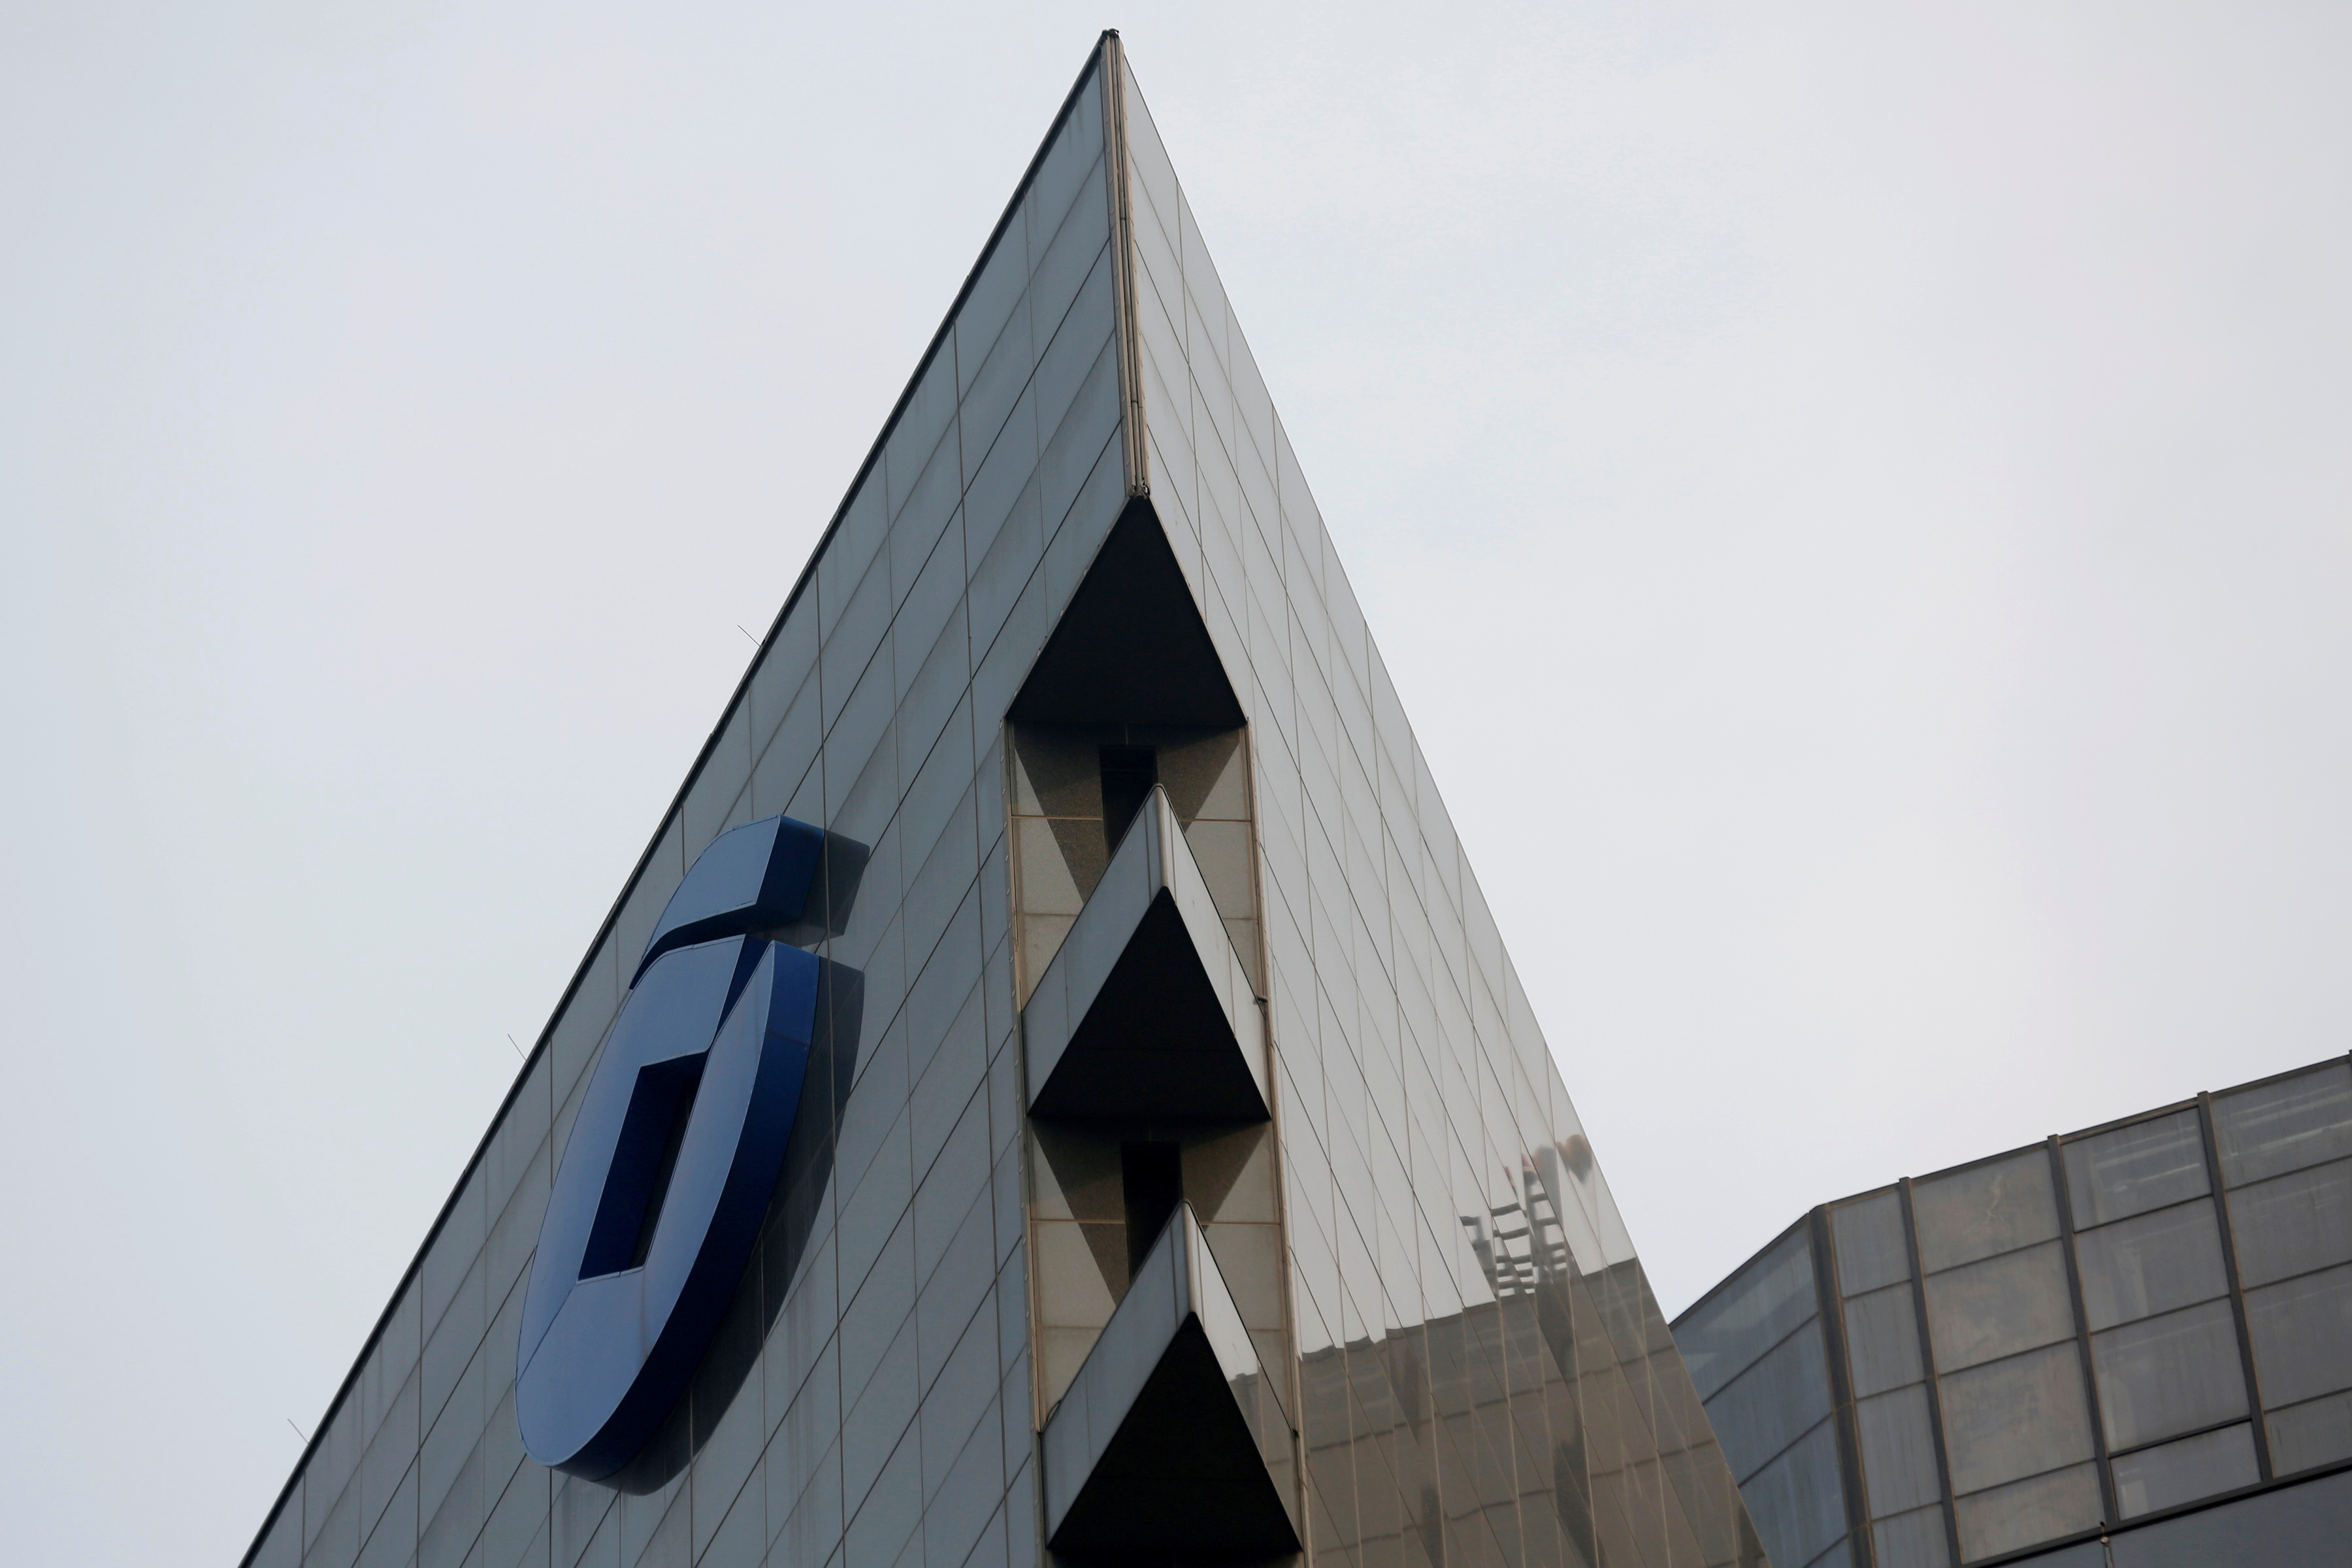 China Construction Bank Corp logo is seen on its headquarters in Beijing